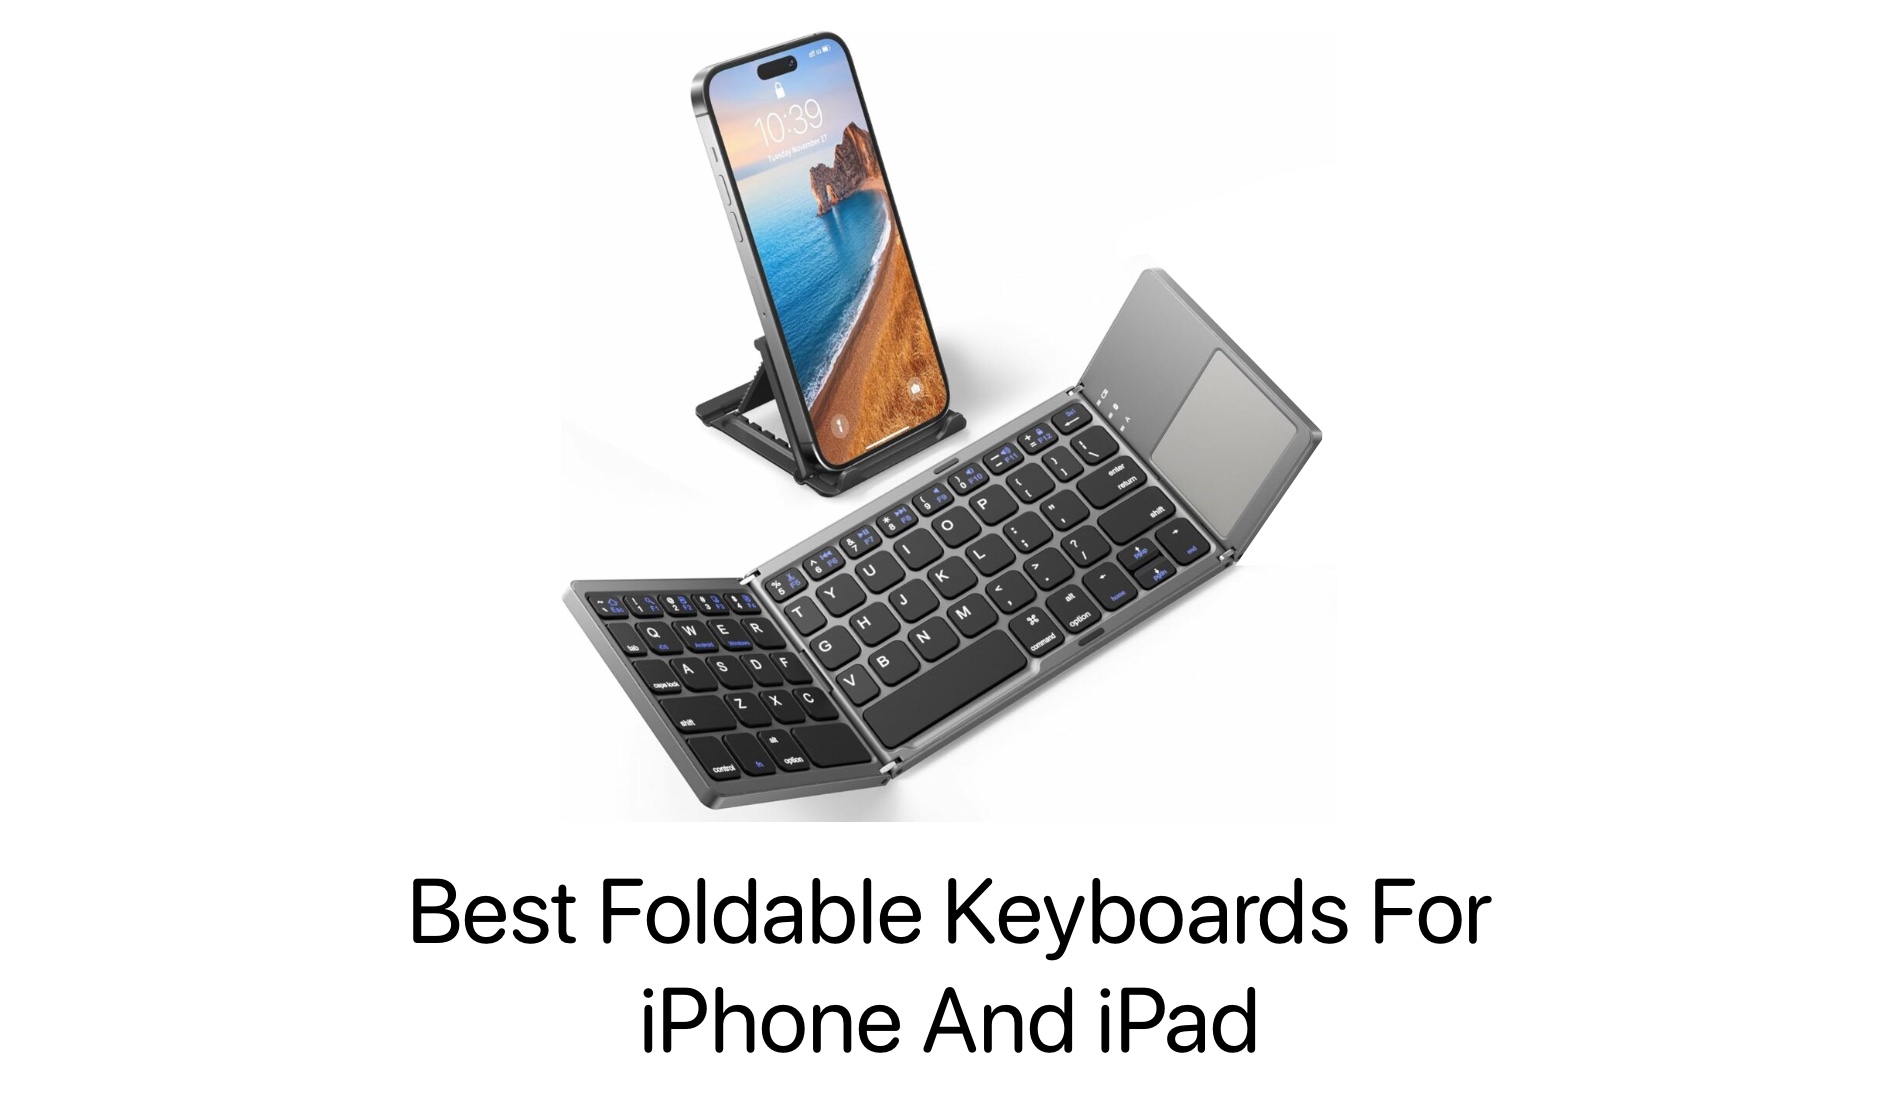 Best Folding Mini Keyboards For iPhone And iPad - iOS Hacker